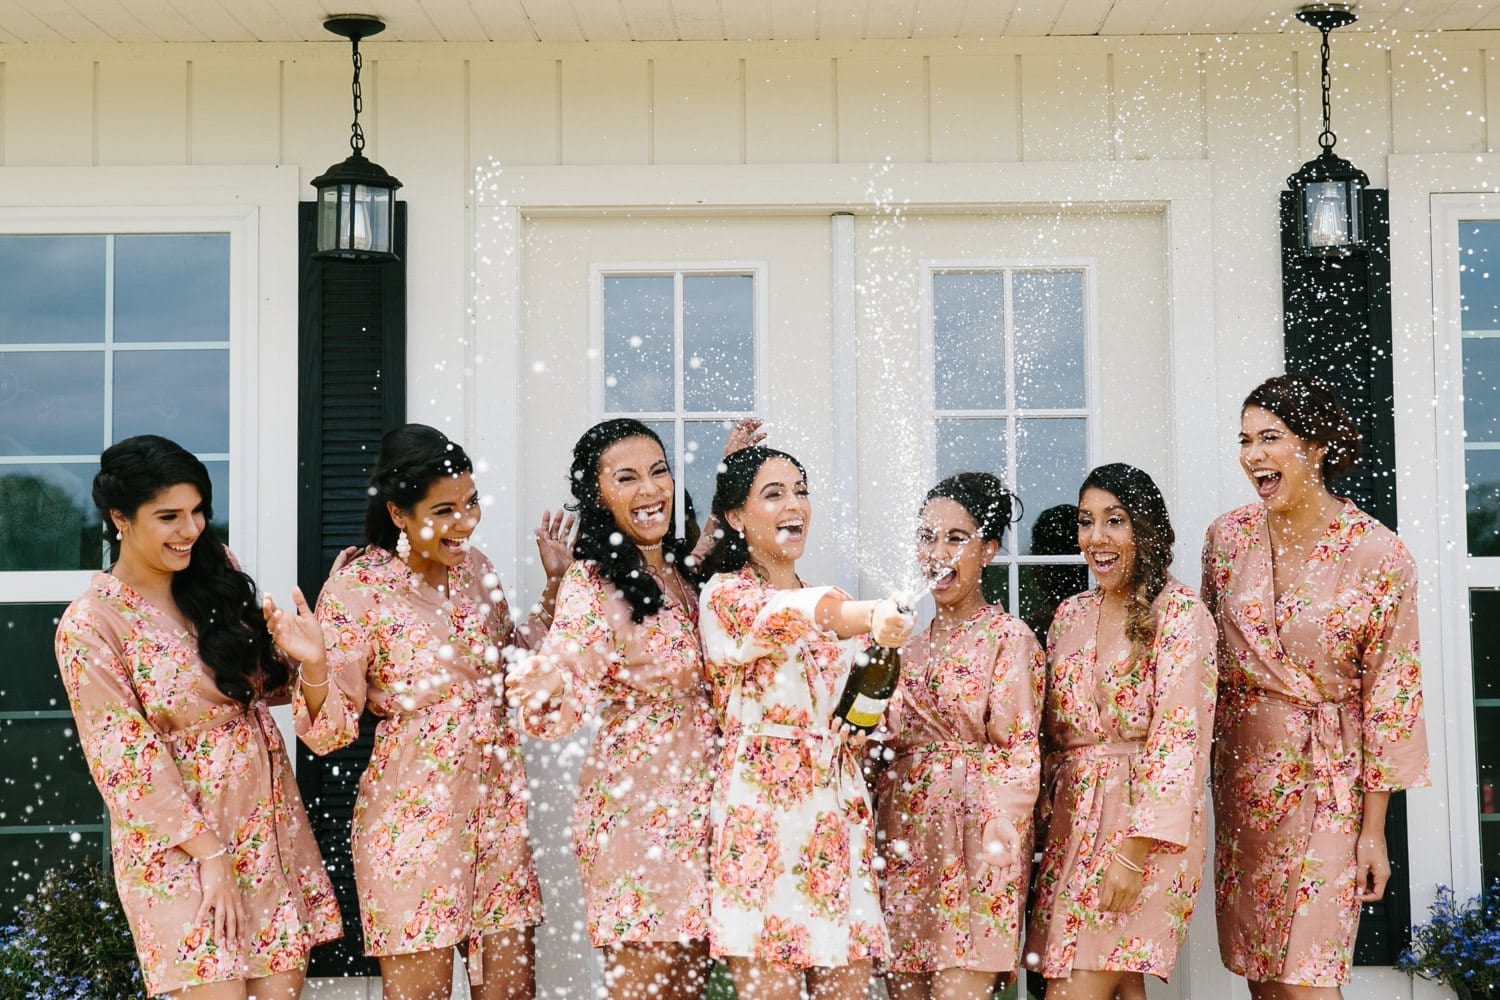 Bridesmaids having fun popping some champagne on the wedding day. October Oaks Wedding. Rustic Chic Celebration